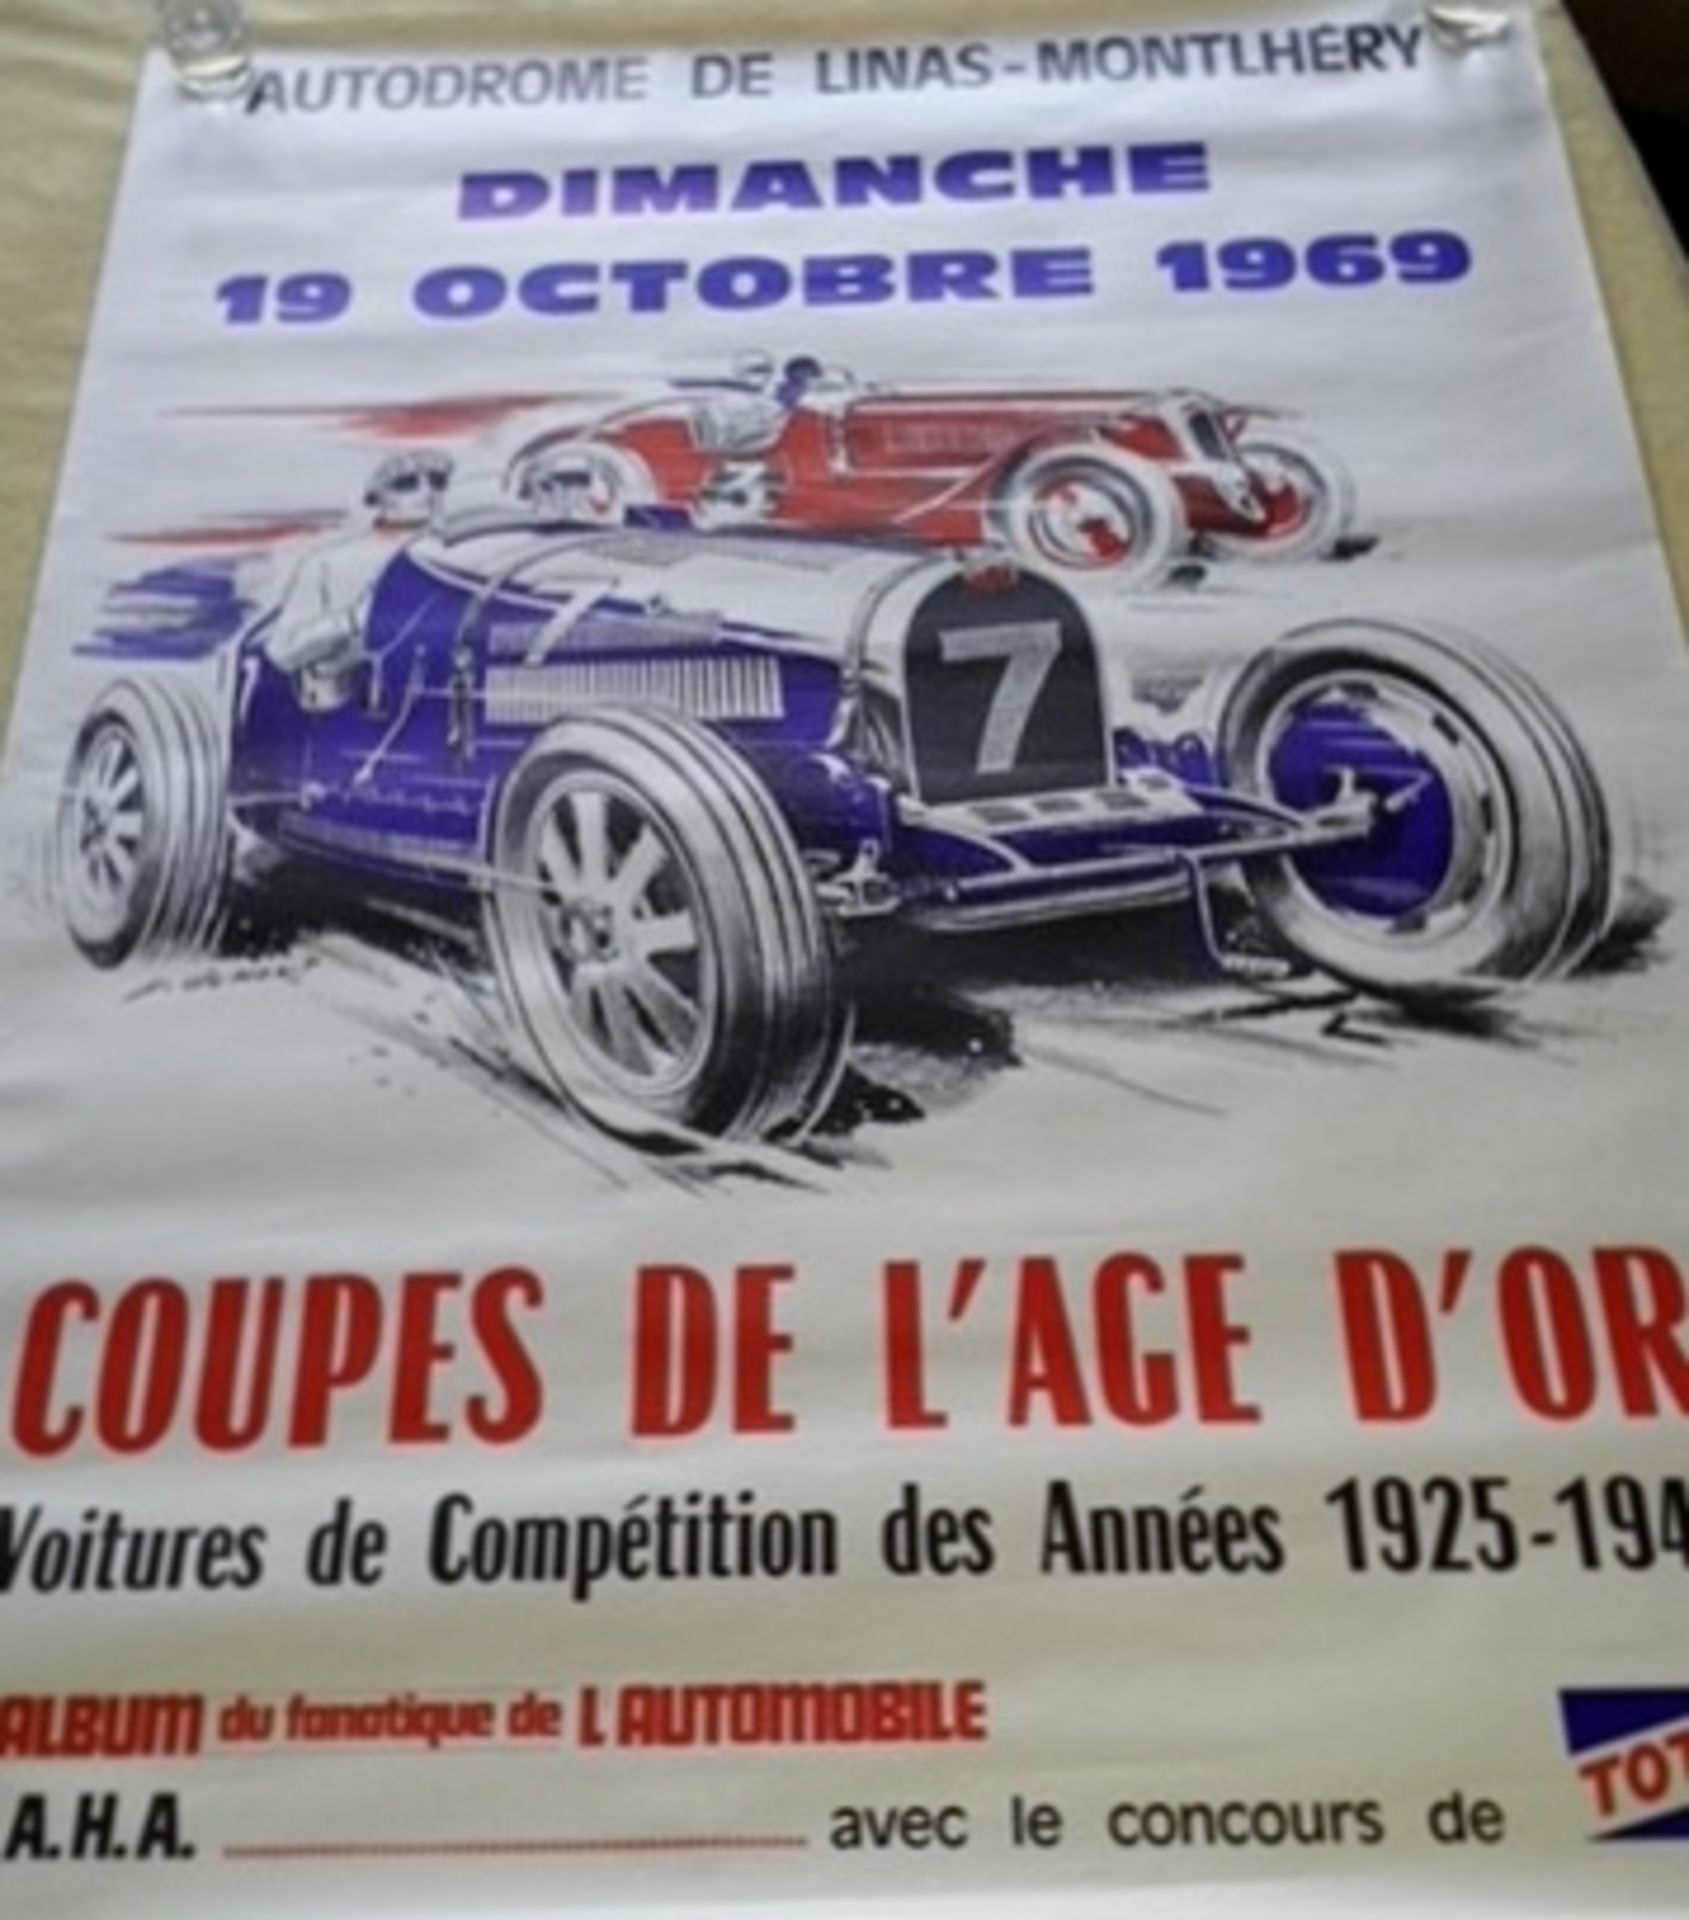 Motorsport related posters. - Image 2 of 4